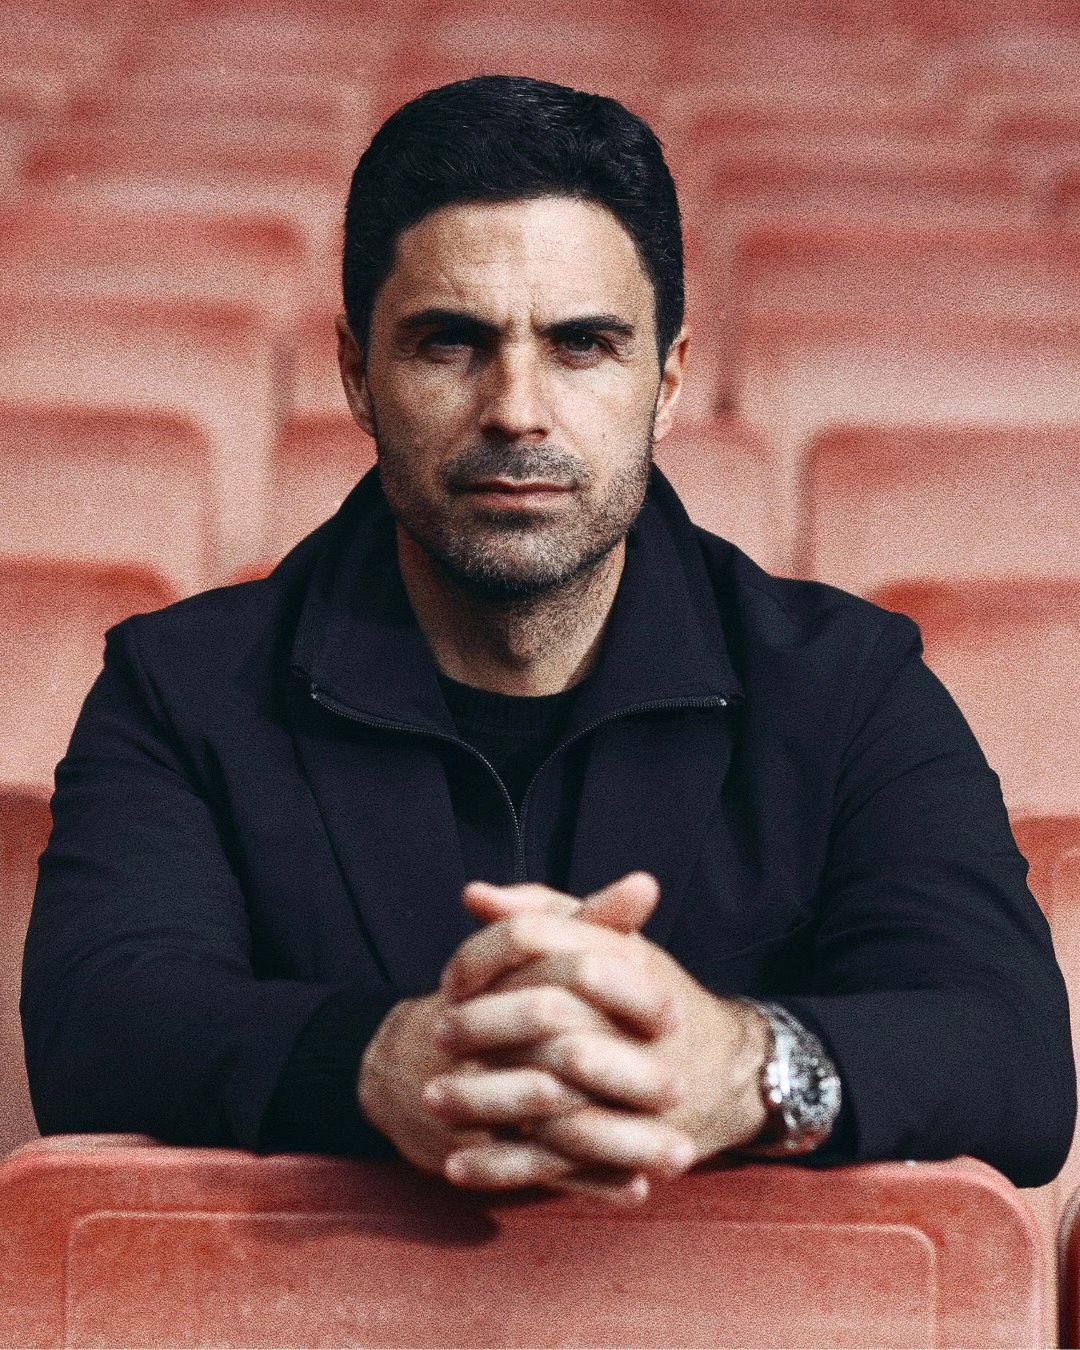 Patrick Timmons on X: "Mikel Arteta: 'Arsenal has got an aura, an elegance and a class. You either have it or you don't'. https://t.co/B2CHMu41oe" / X